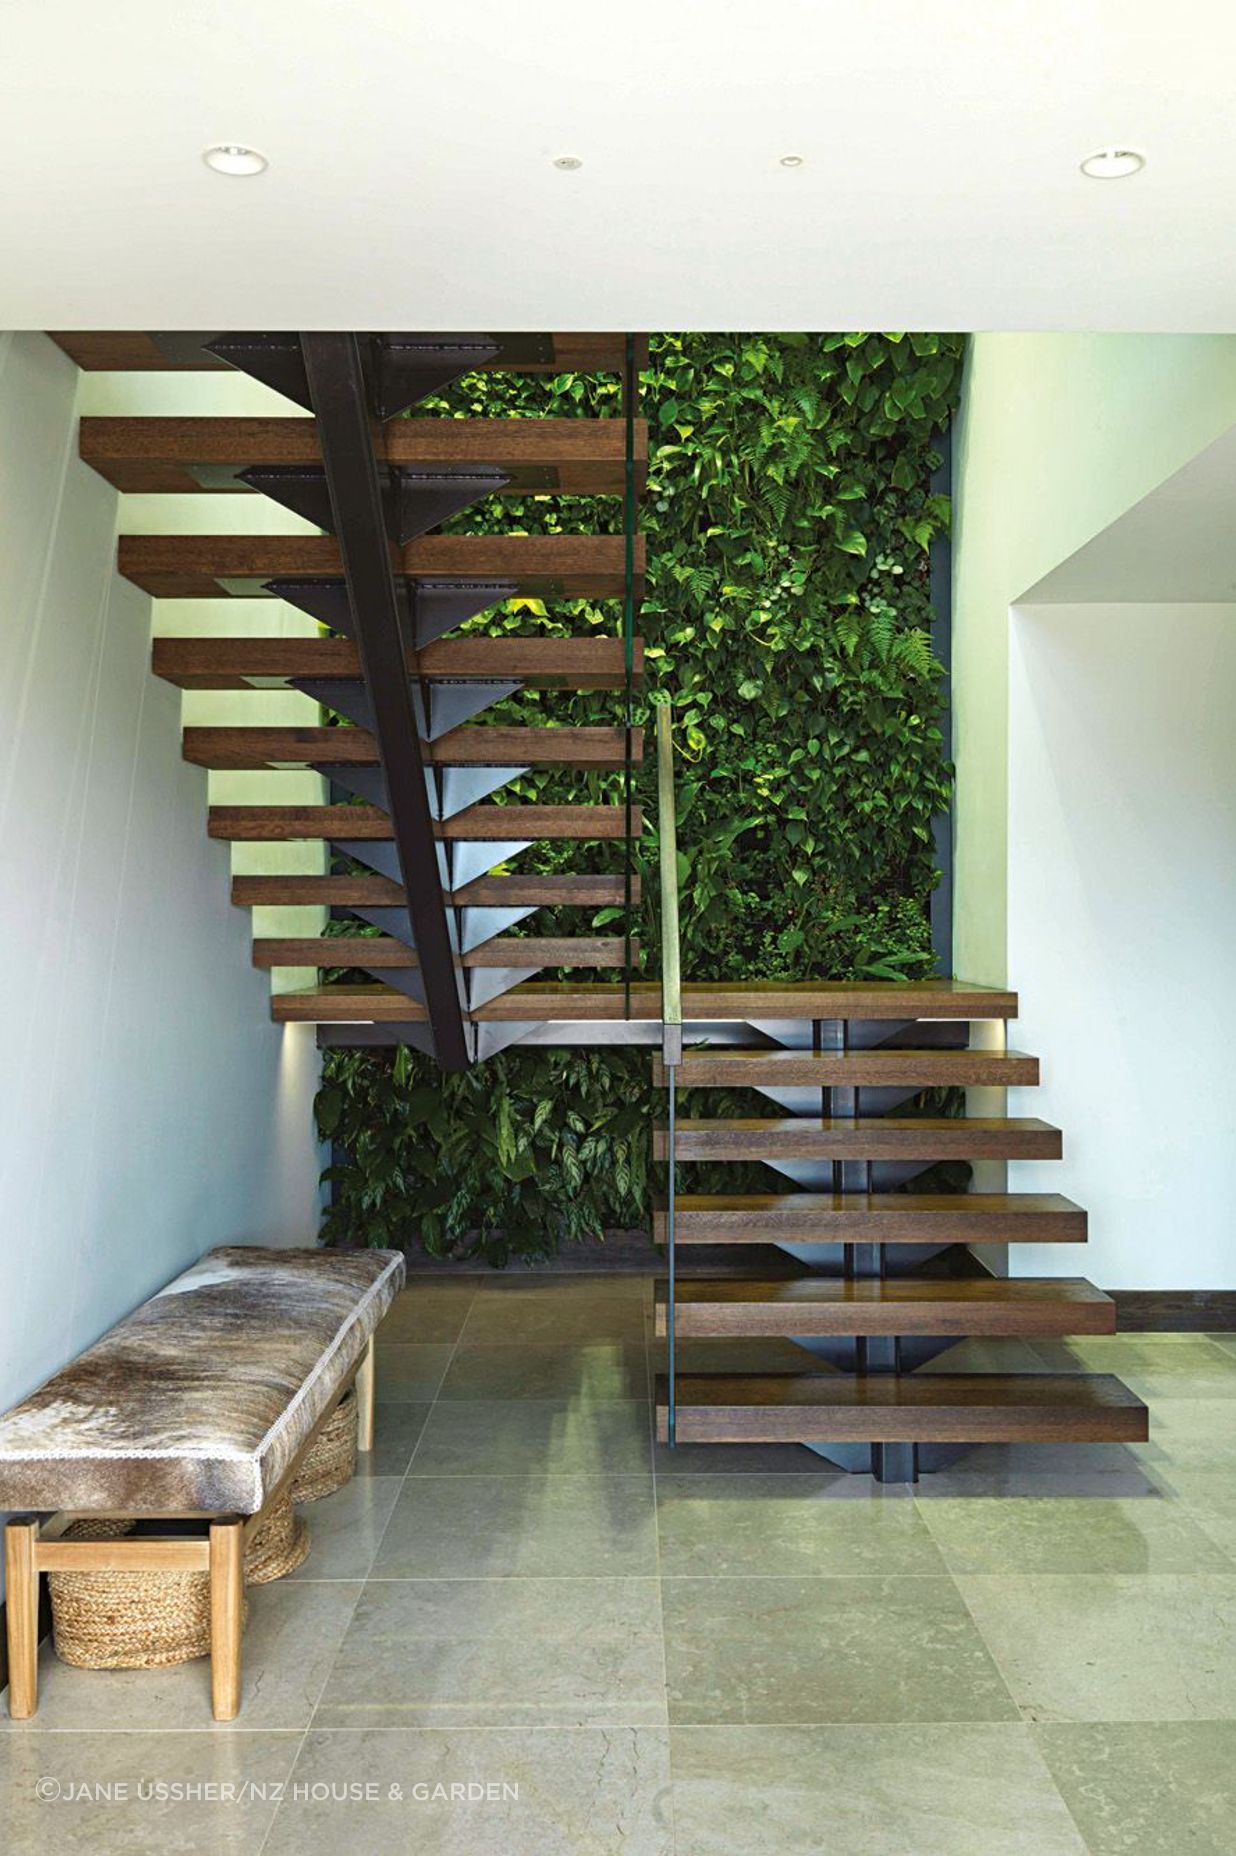 The floating stairs give an airy feel to the stairwell; the McNalls have chosen earthy, natural materials like the cowhide-covered bench and the ivory cross-cut limestone tiles used inside and out.